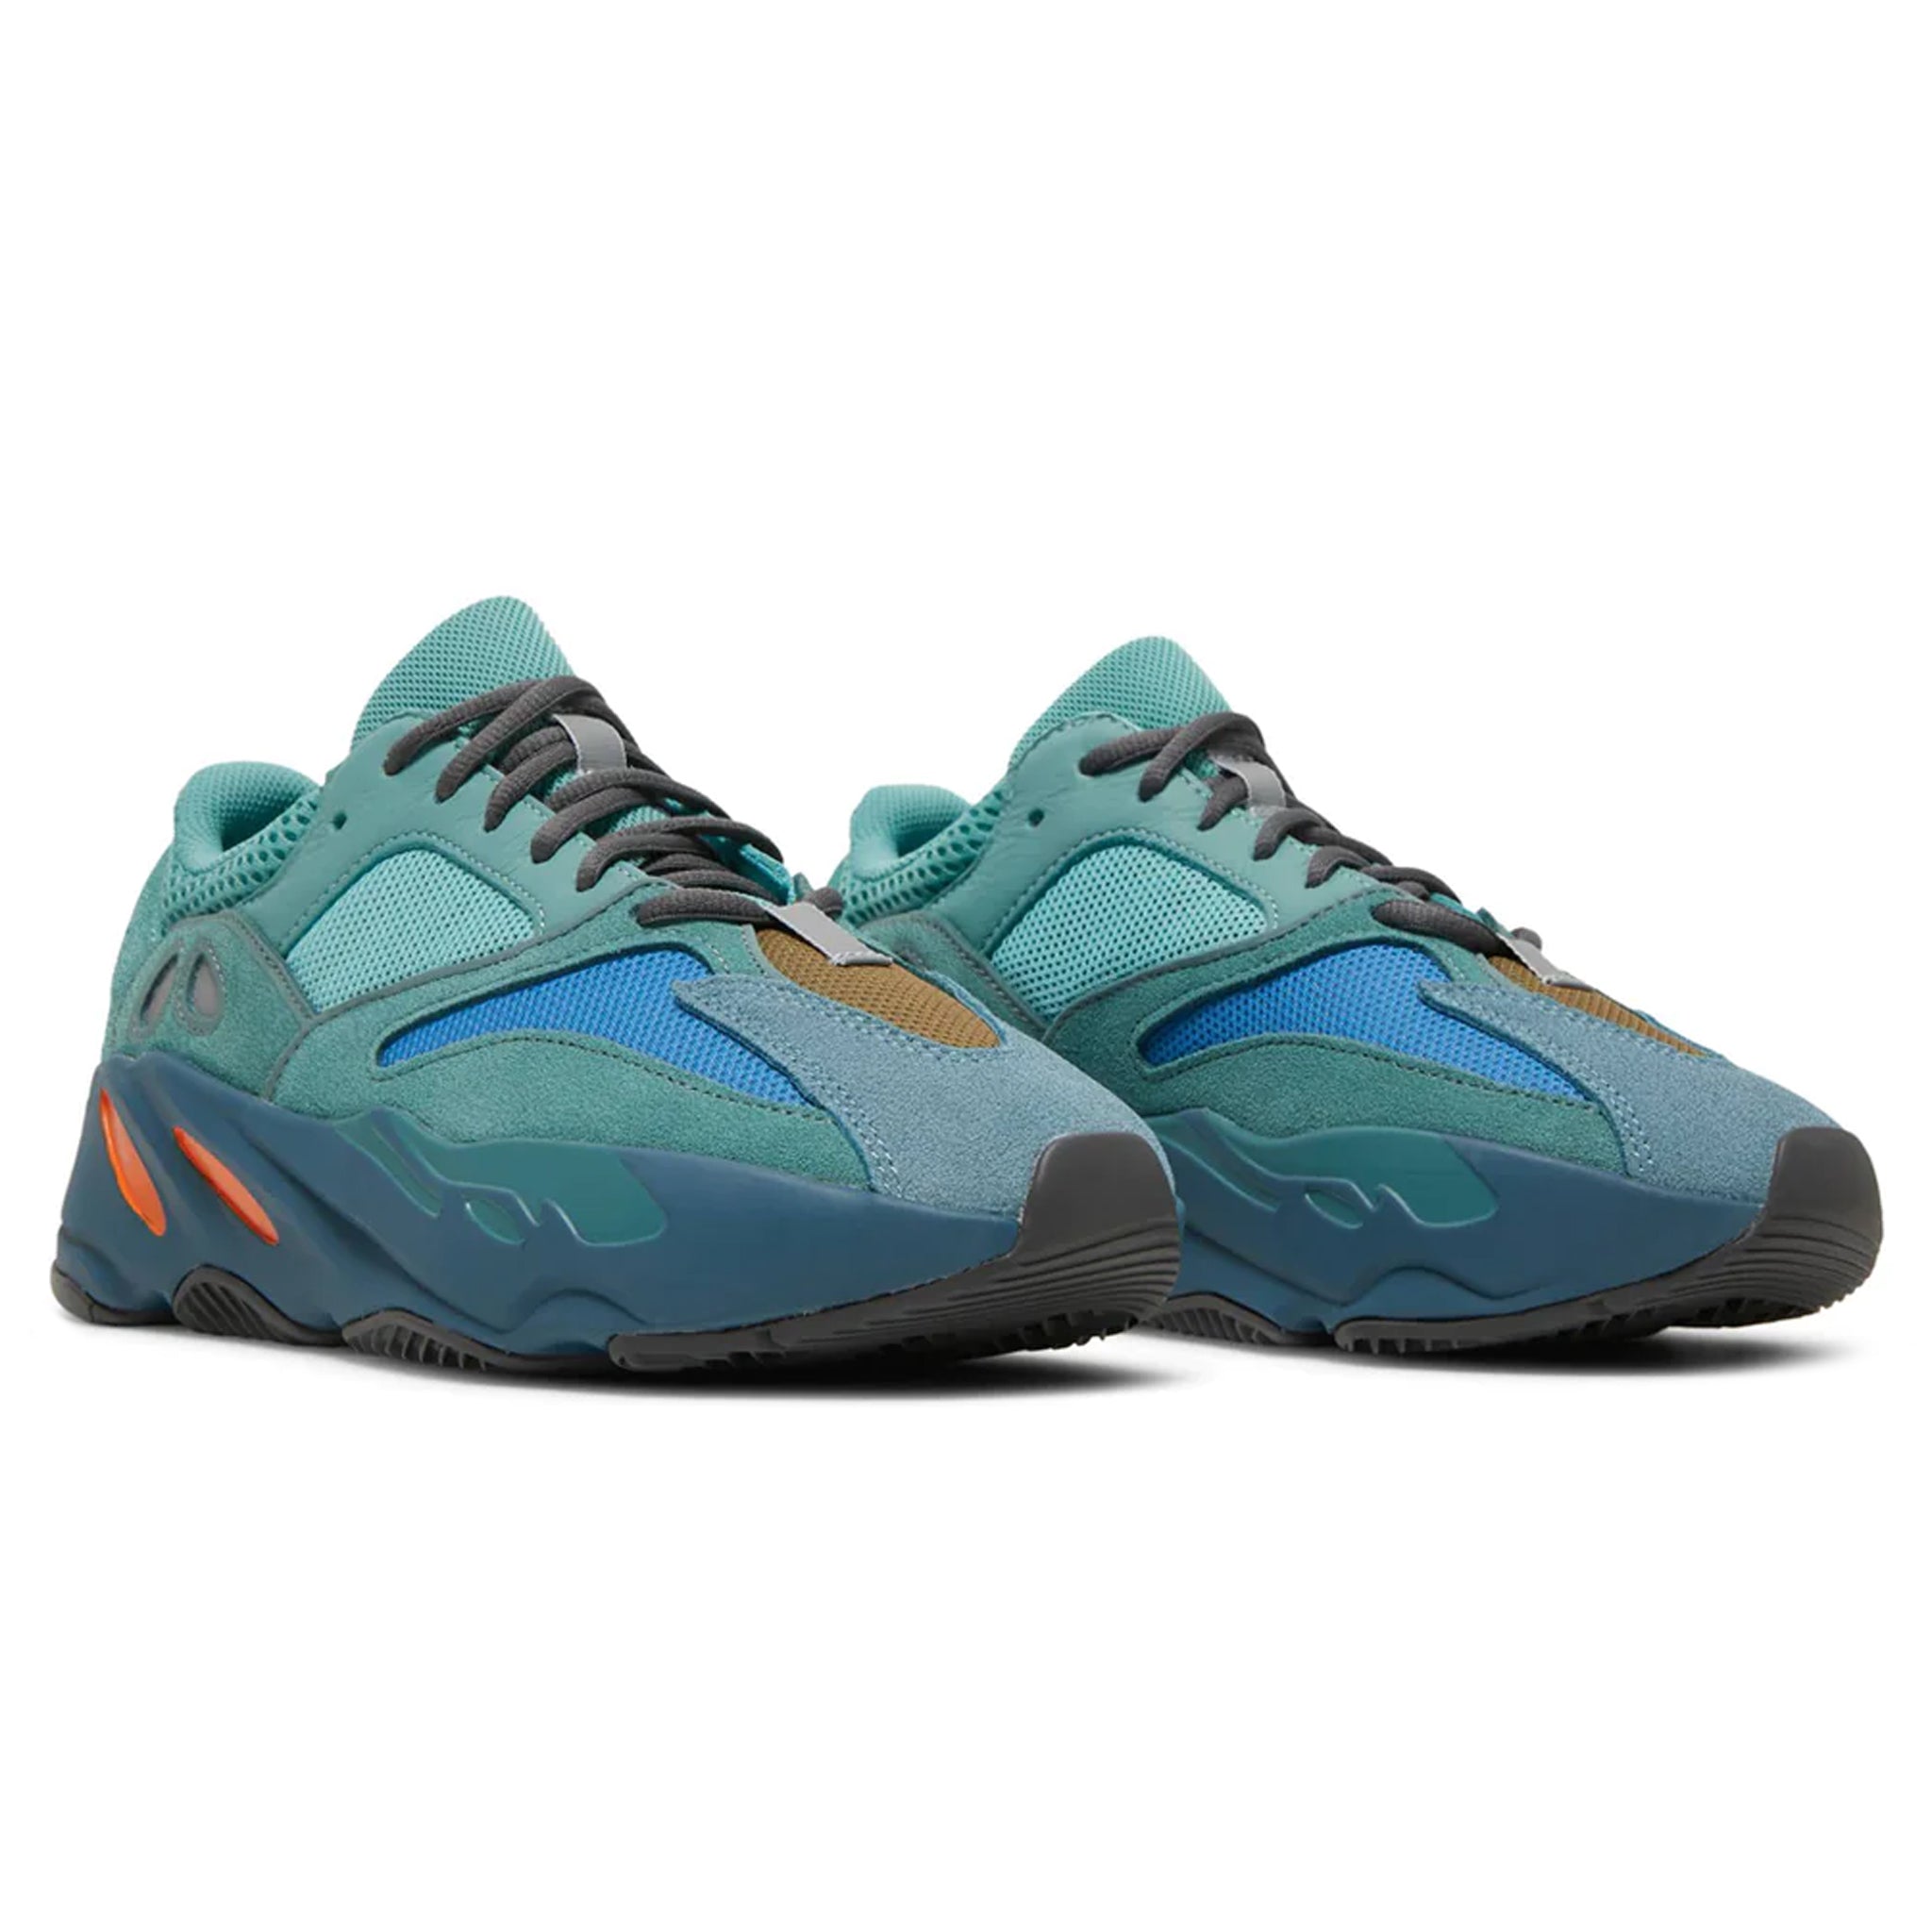 Front side view of Adidas Yeezy Boost 700 Boost Faded Azure GZ2002